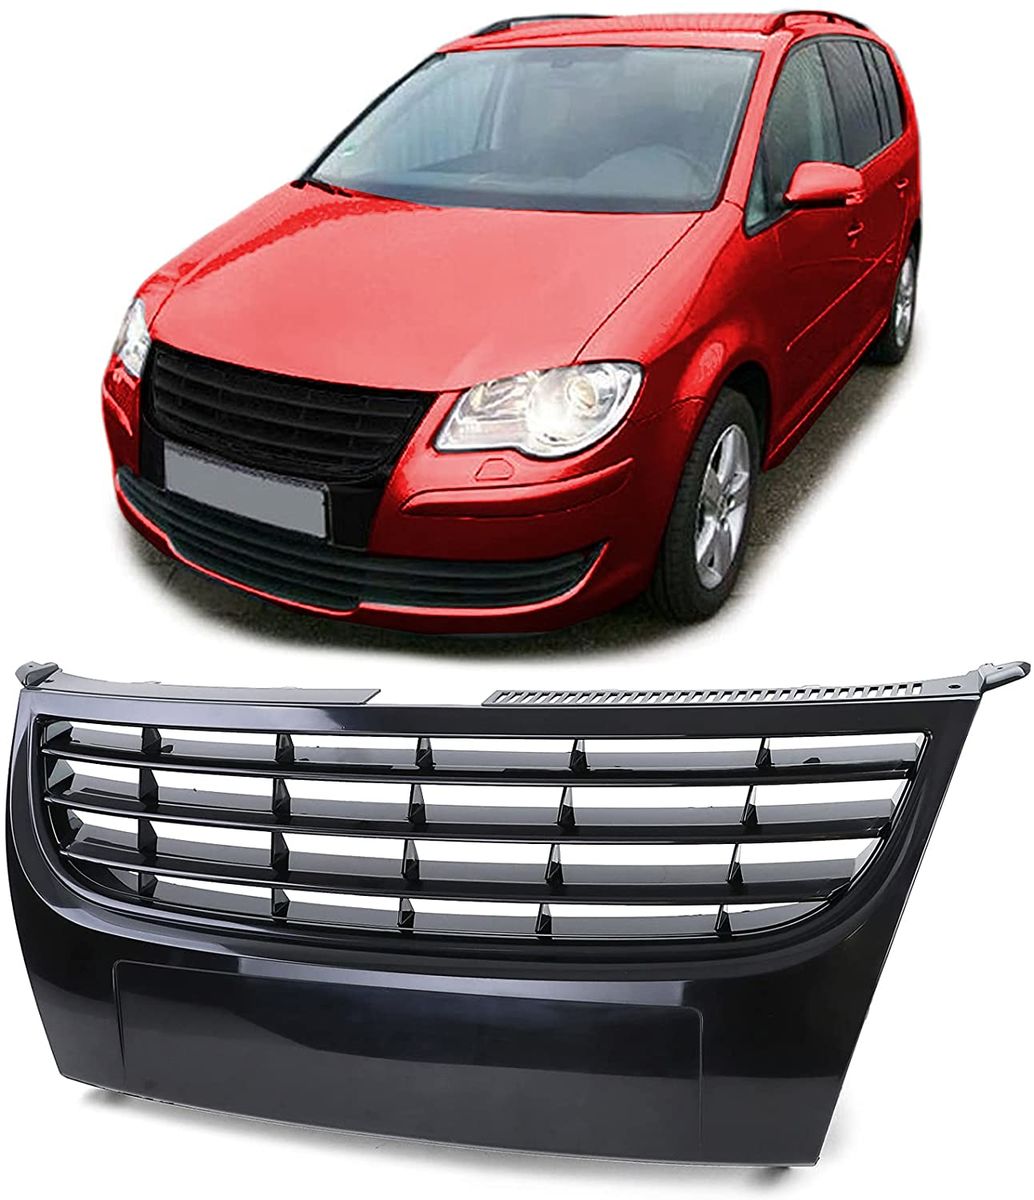 Front Badgeless Grill for VW Caddy 2K 10-15 / Touran 06-10